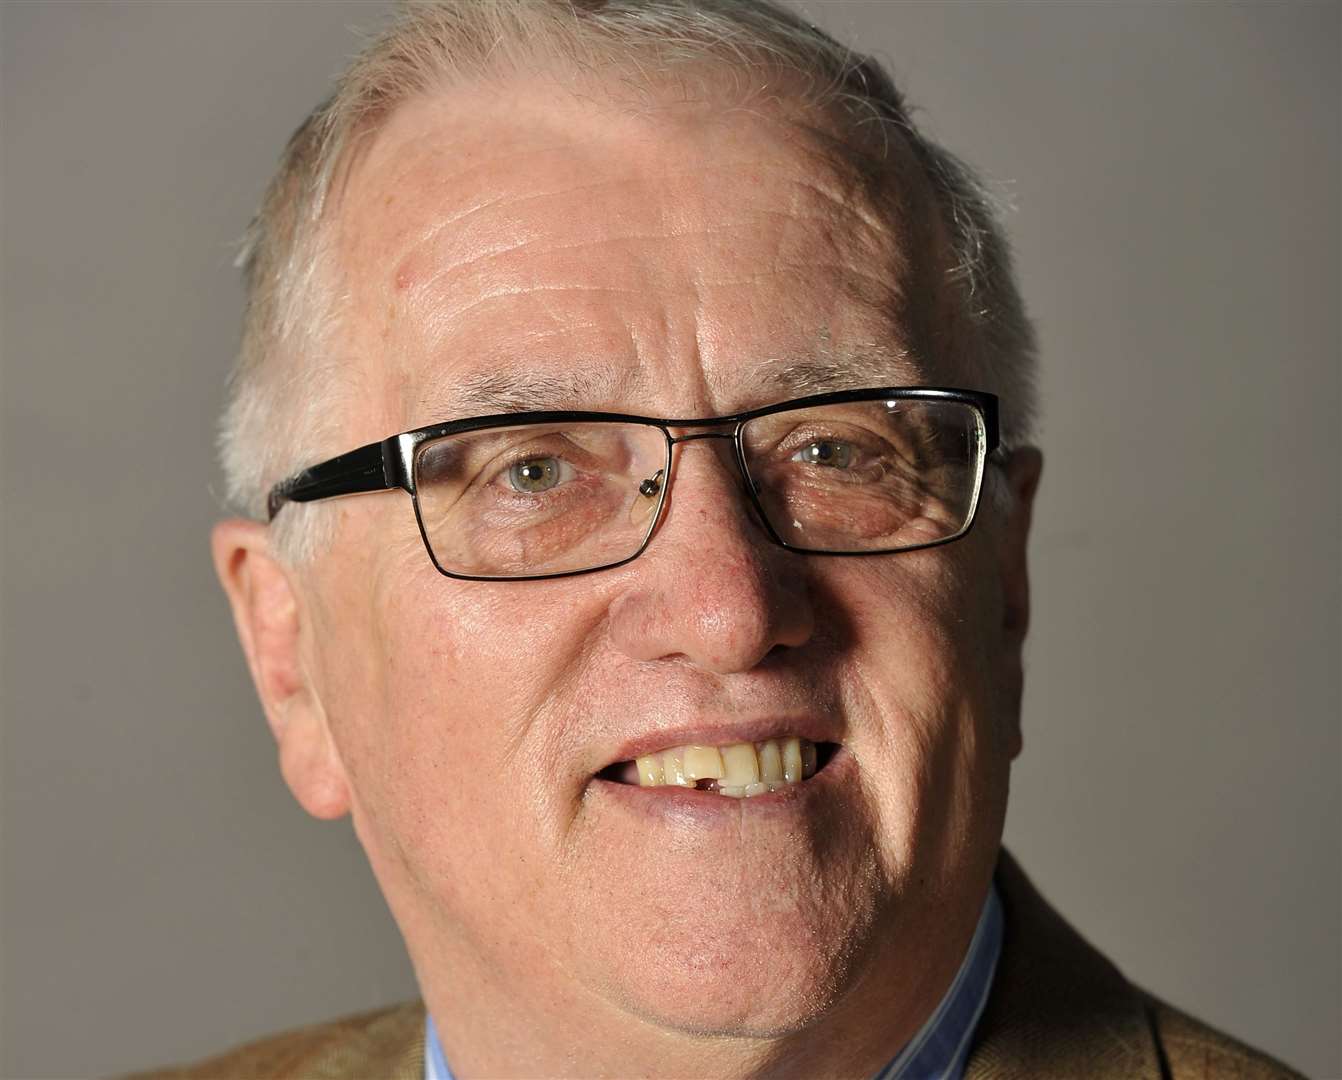 Cllr Howard Doe (Con), Medway Council’s portfolio holder for housing and community services